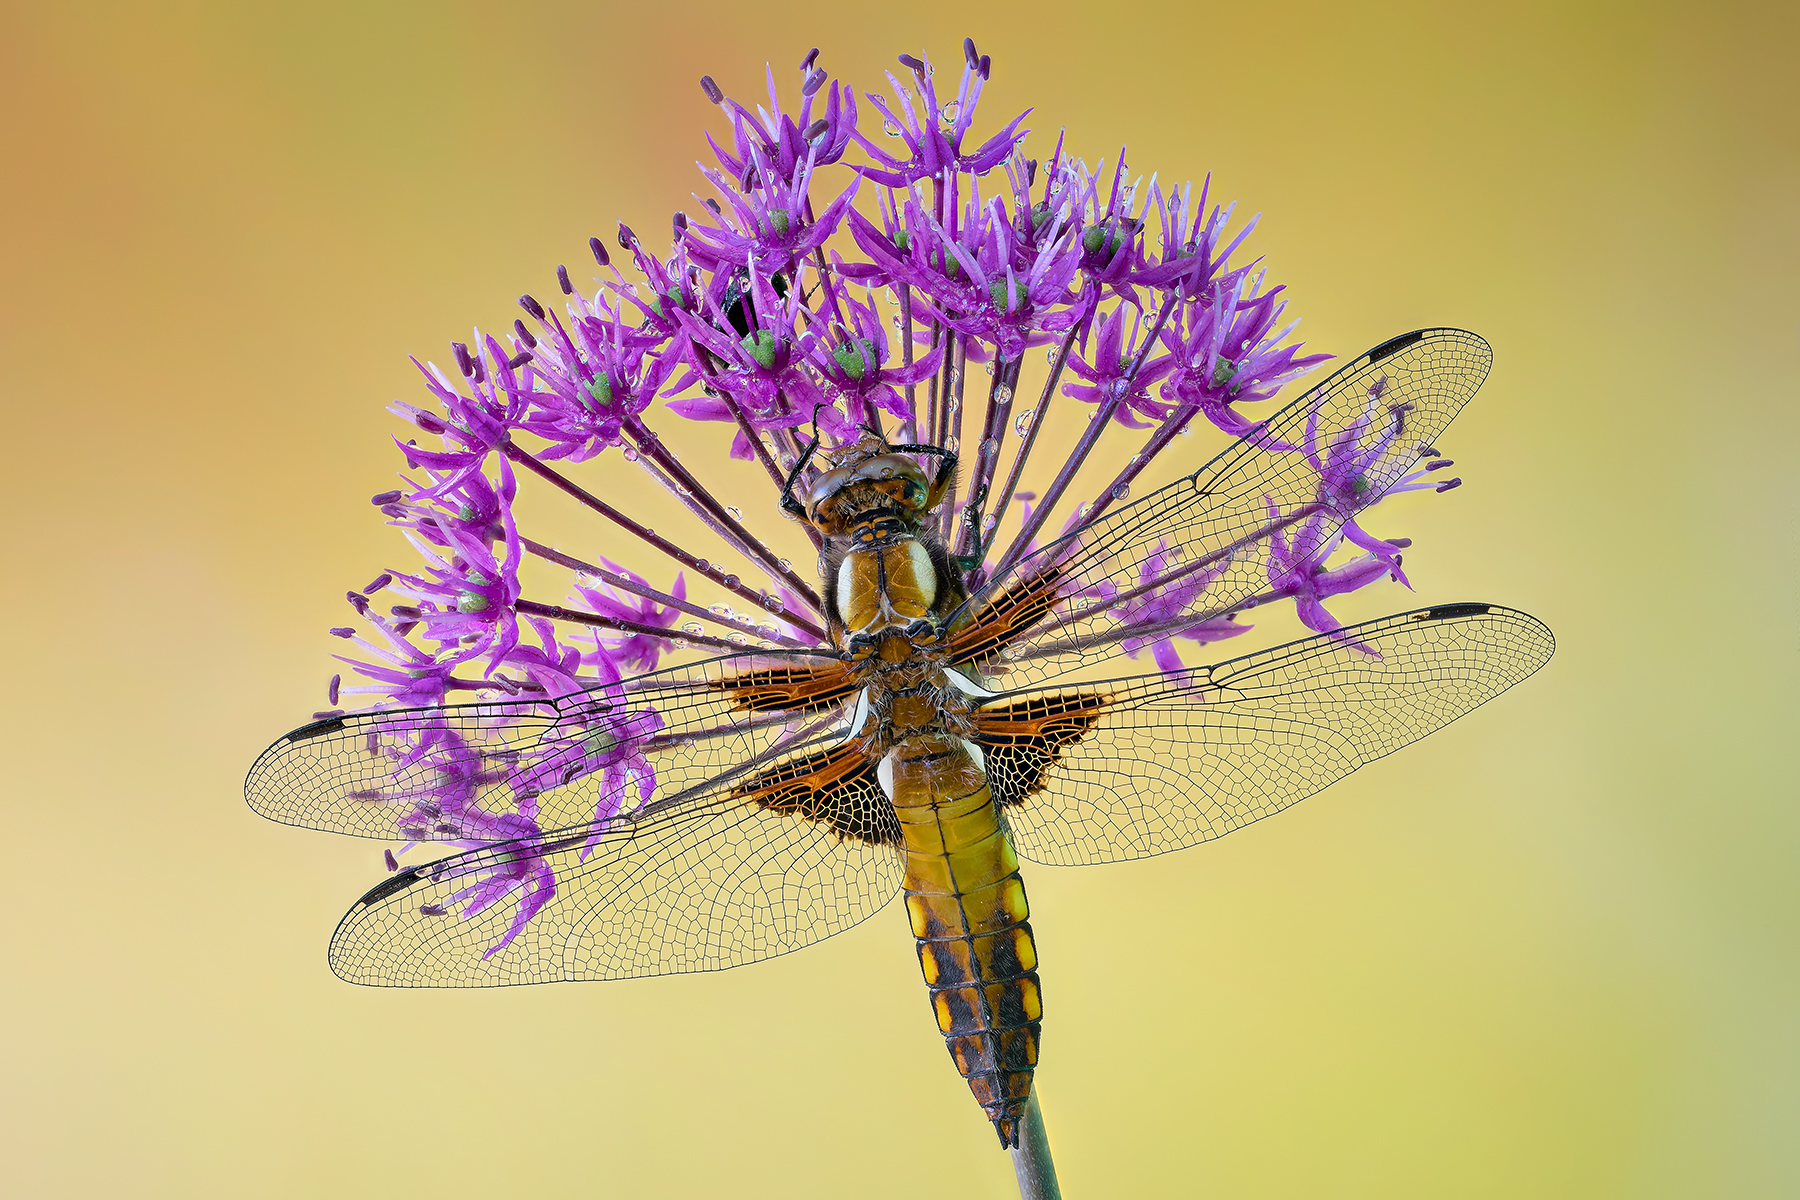 Dragonfly explosion...